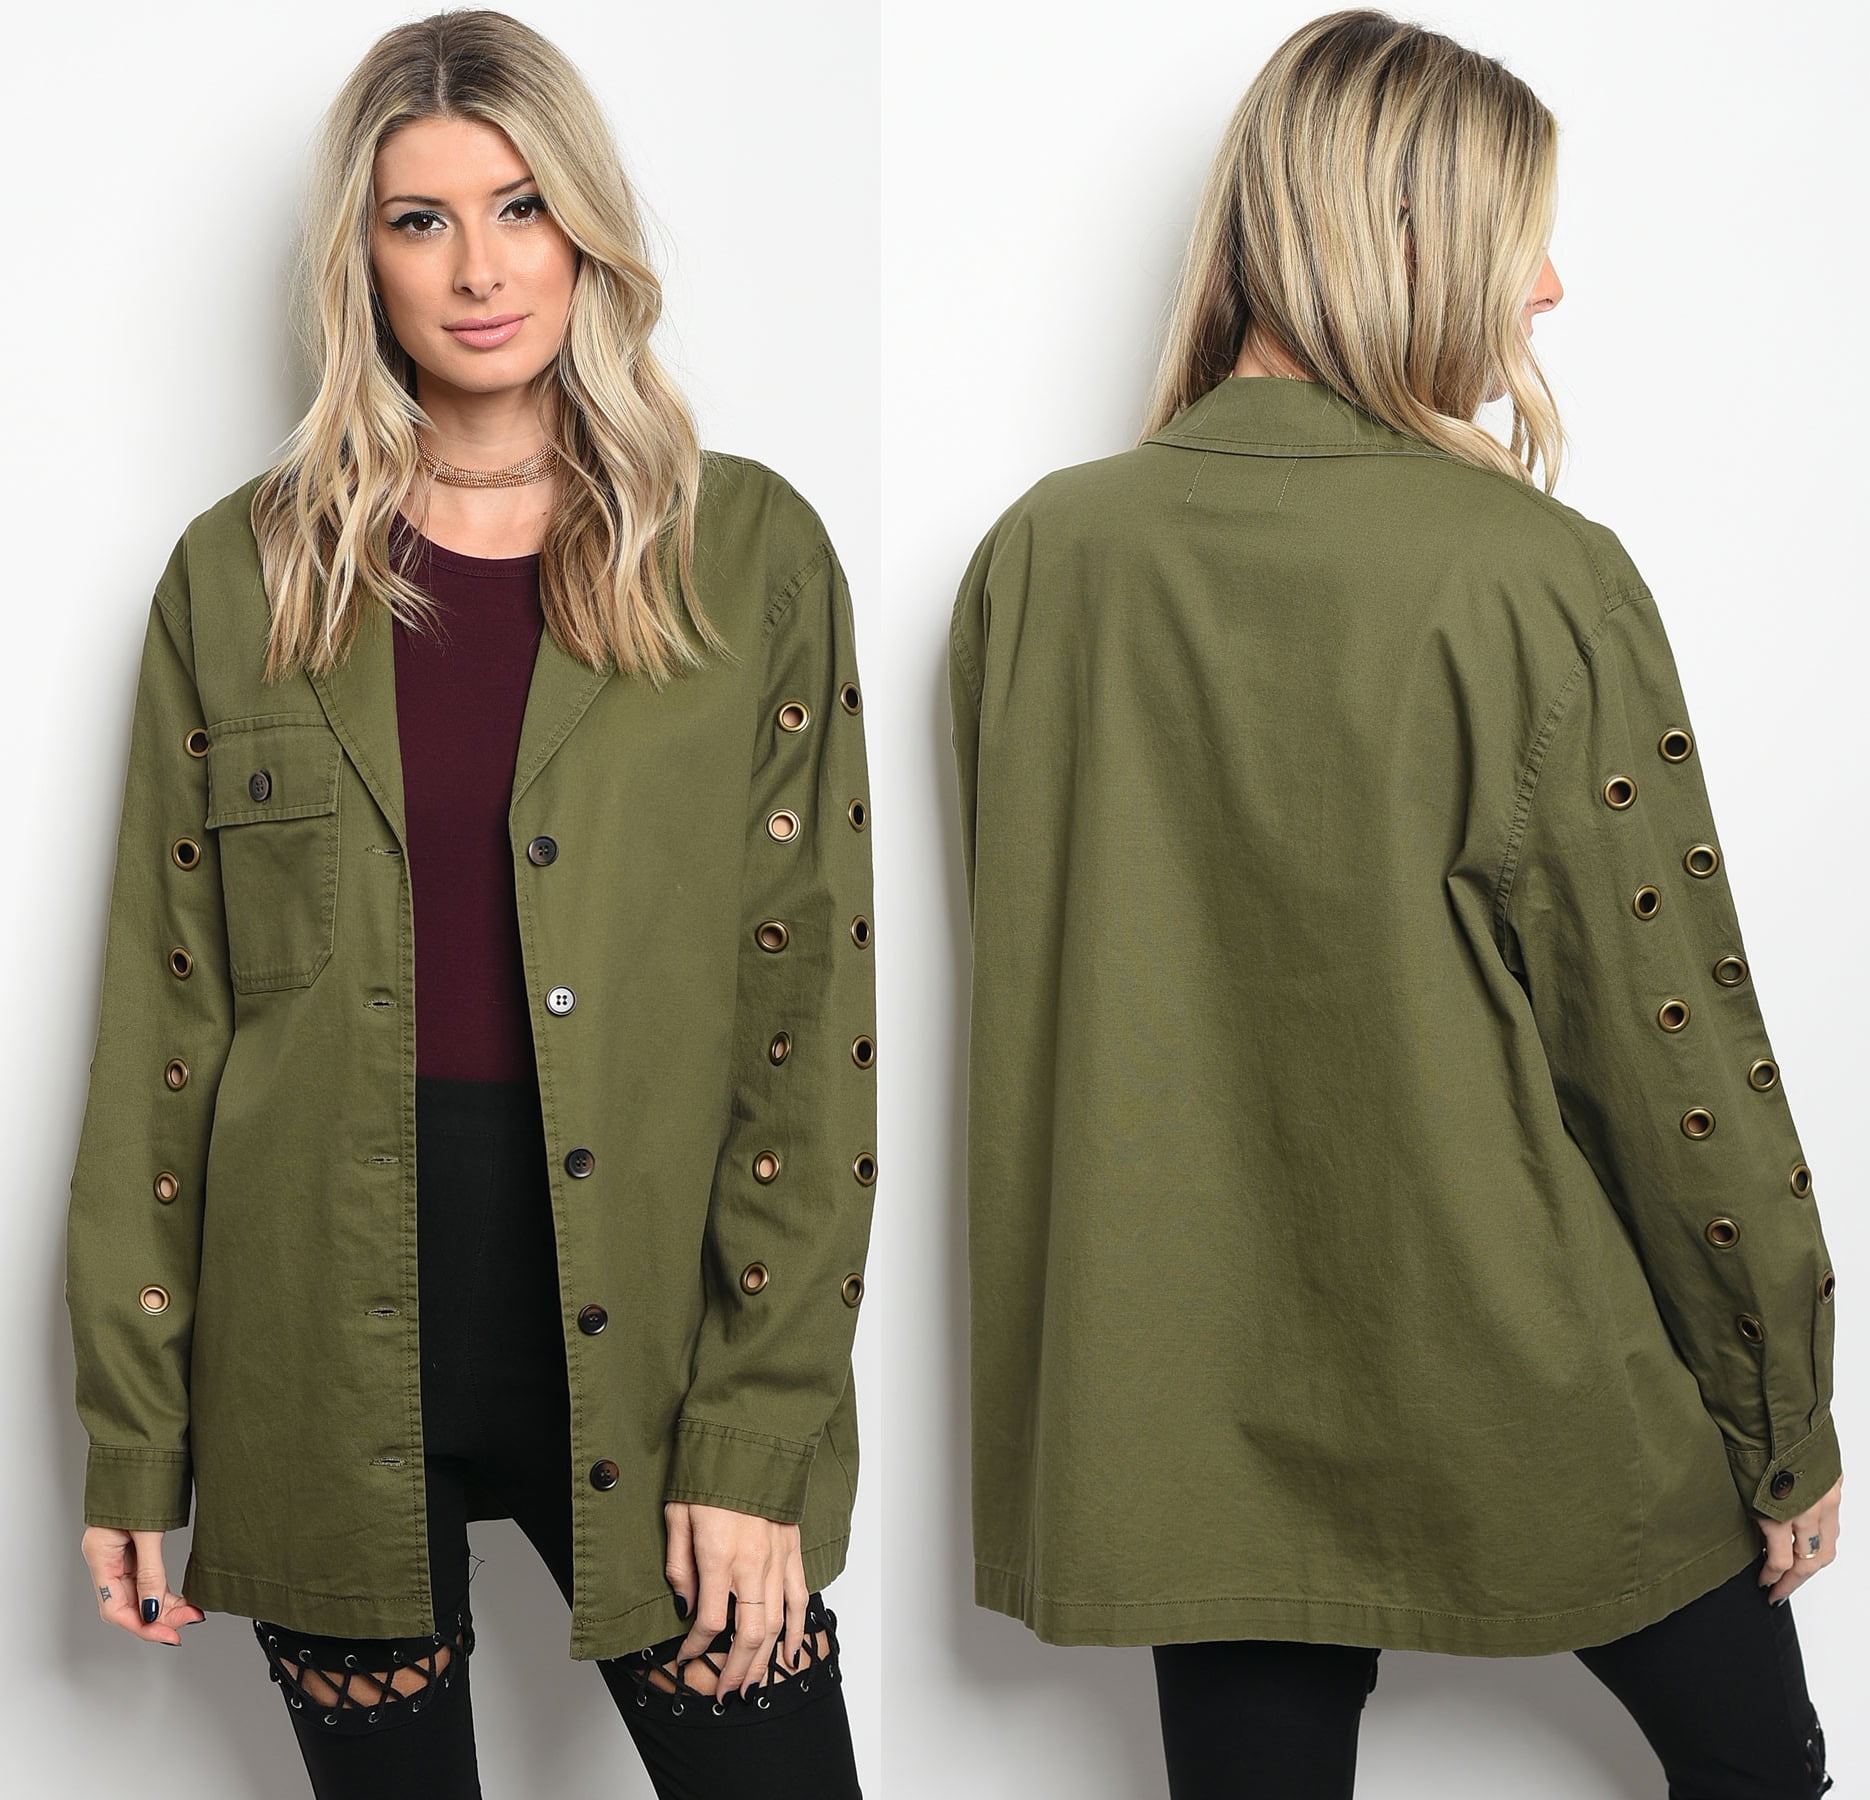 JED FASHION Women's Oversized Cotton Jacket with Grommet Details ...